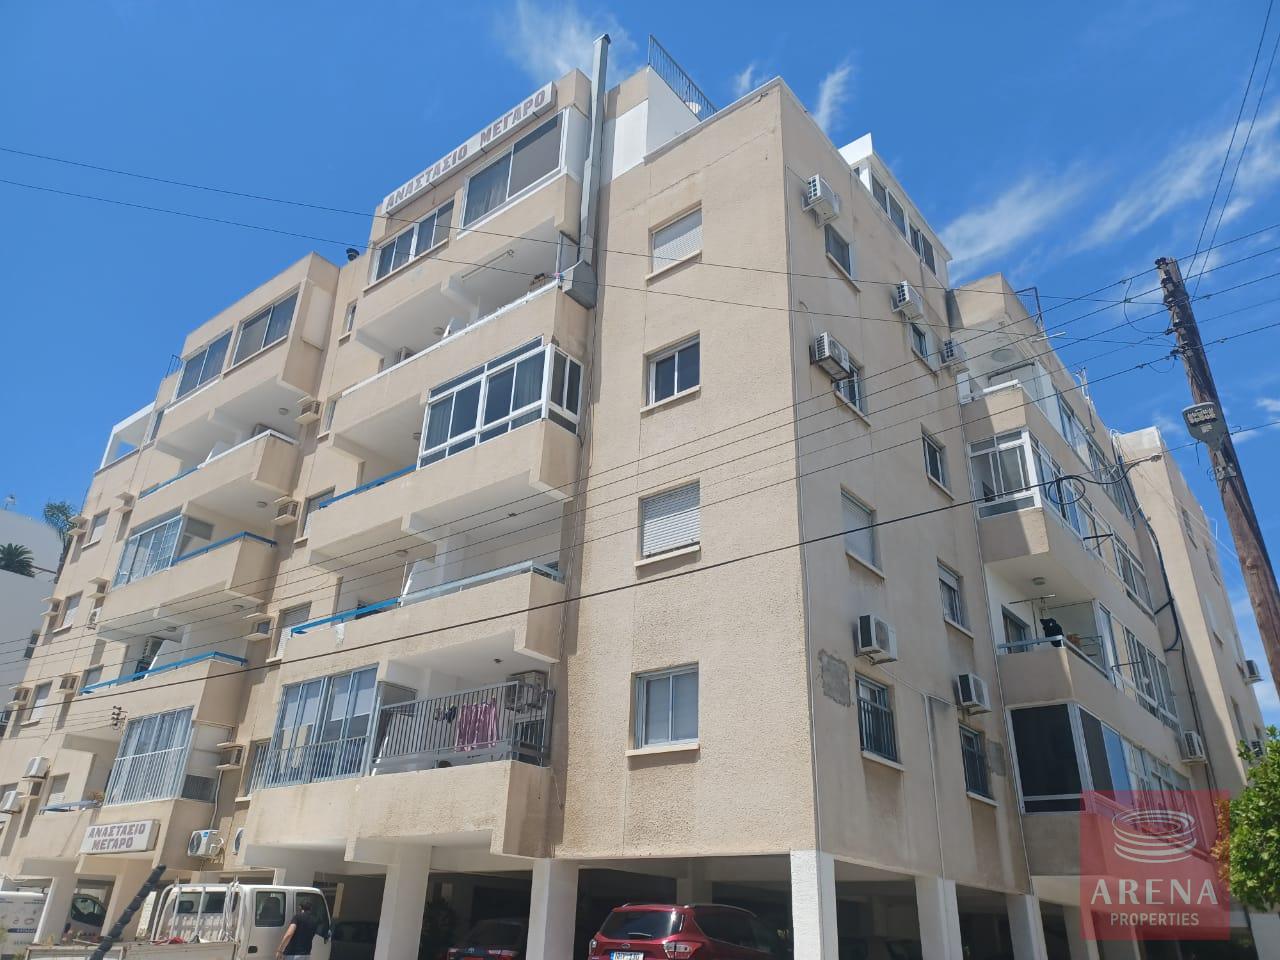 2 bed apartment in Drosia